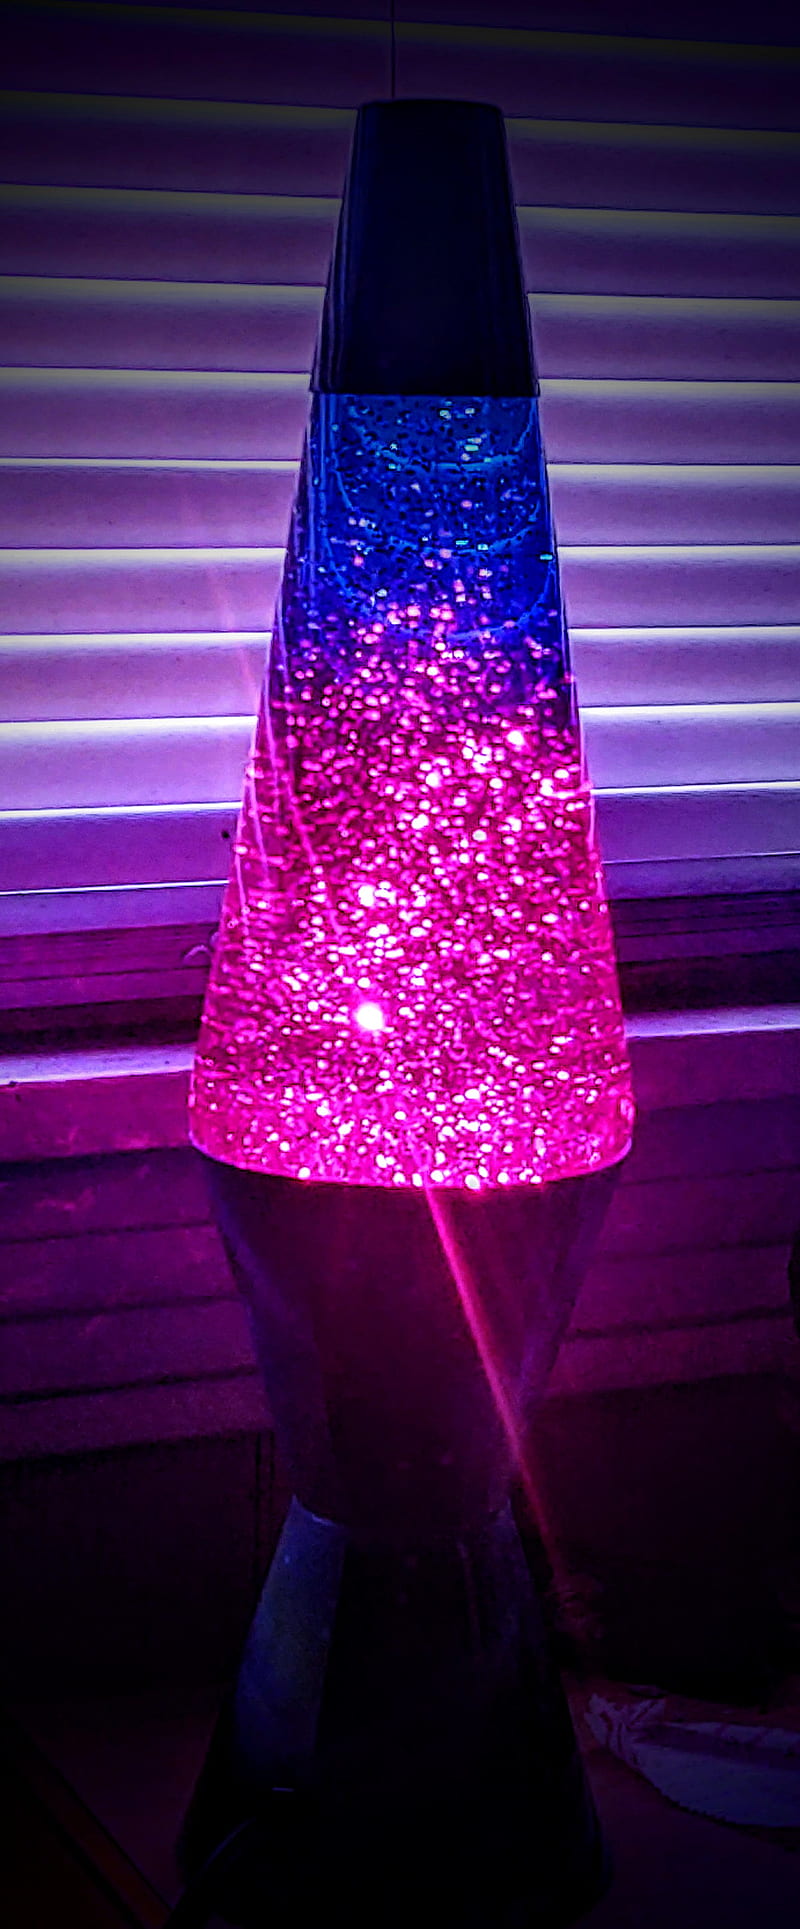 Lava Lamp Pictures  Download Free Images on Unsplash